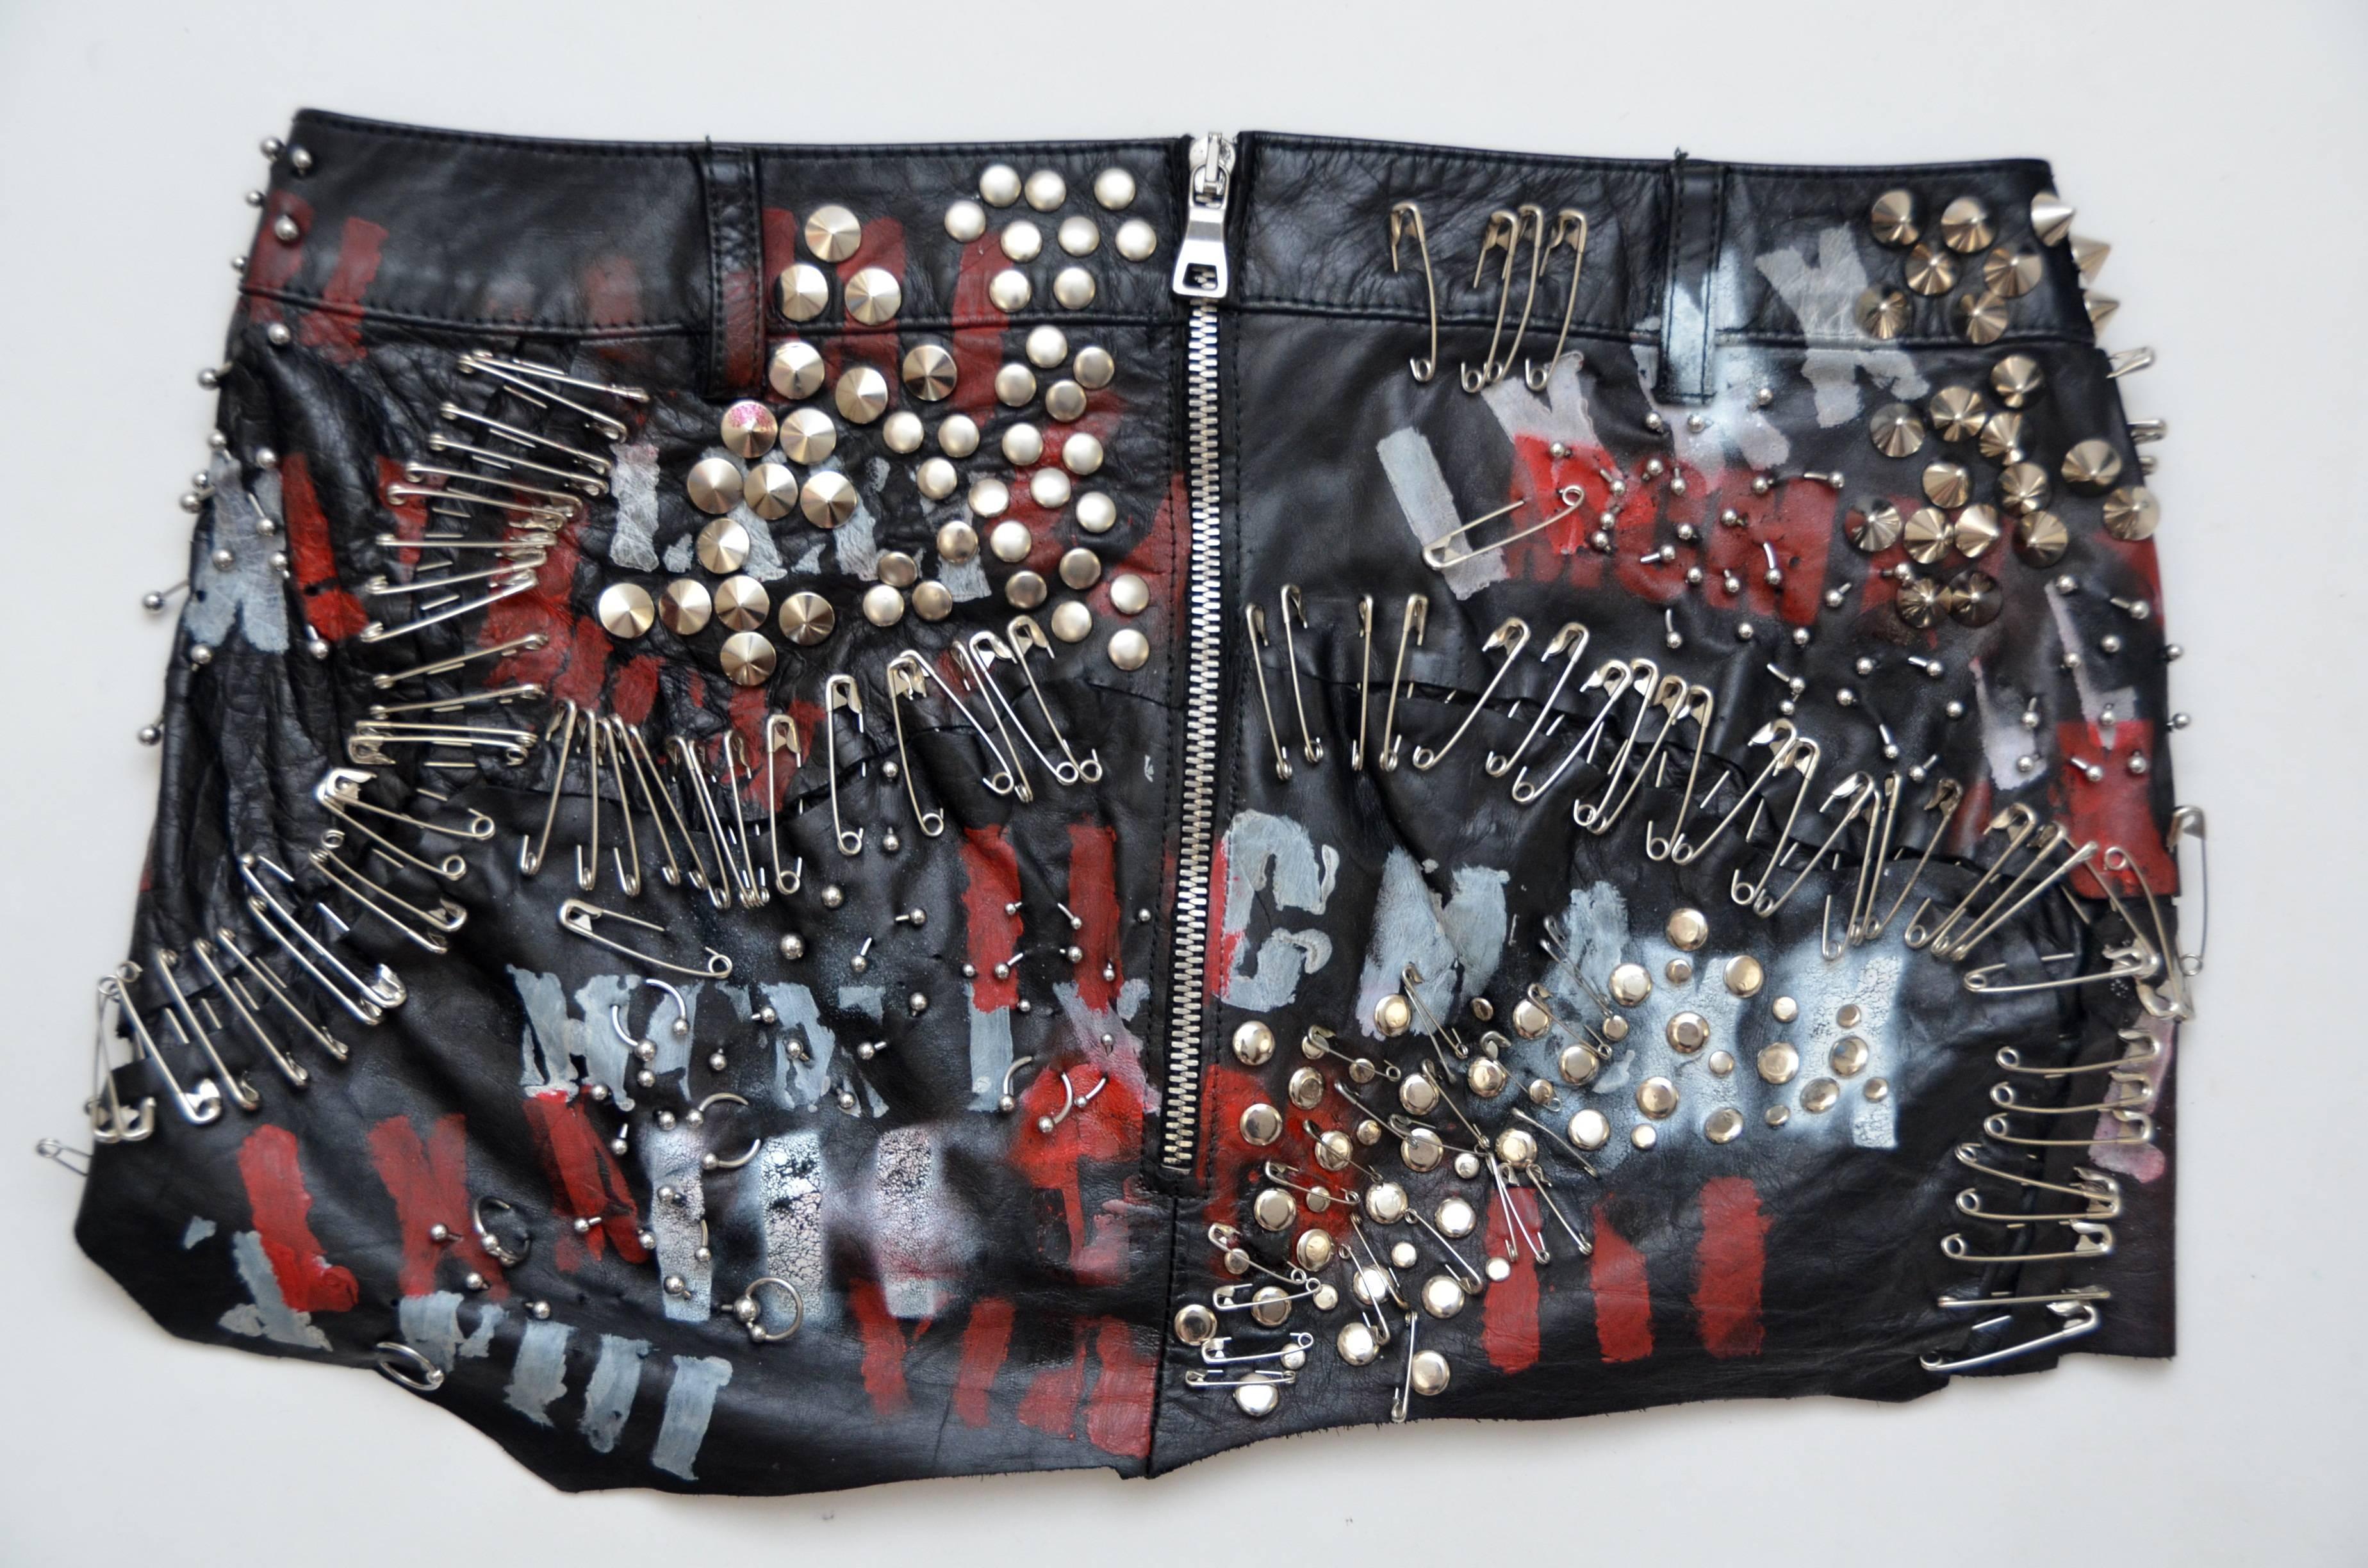 Balmain runway 2011 leather safety pin studded embellished skirt.
Excellent pre-owned collection.Style of the skirt is kind of destructed with lot's of safety pins and different studs with red/white graffiti  words painted and few little